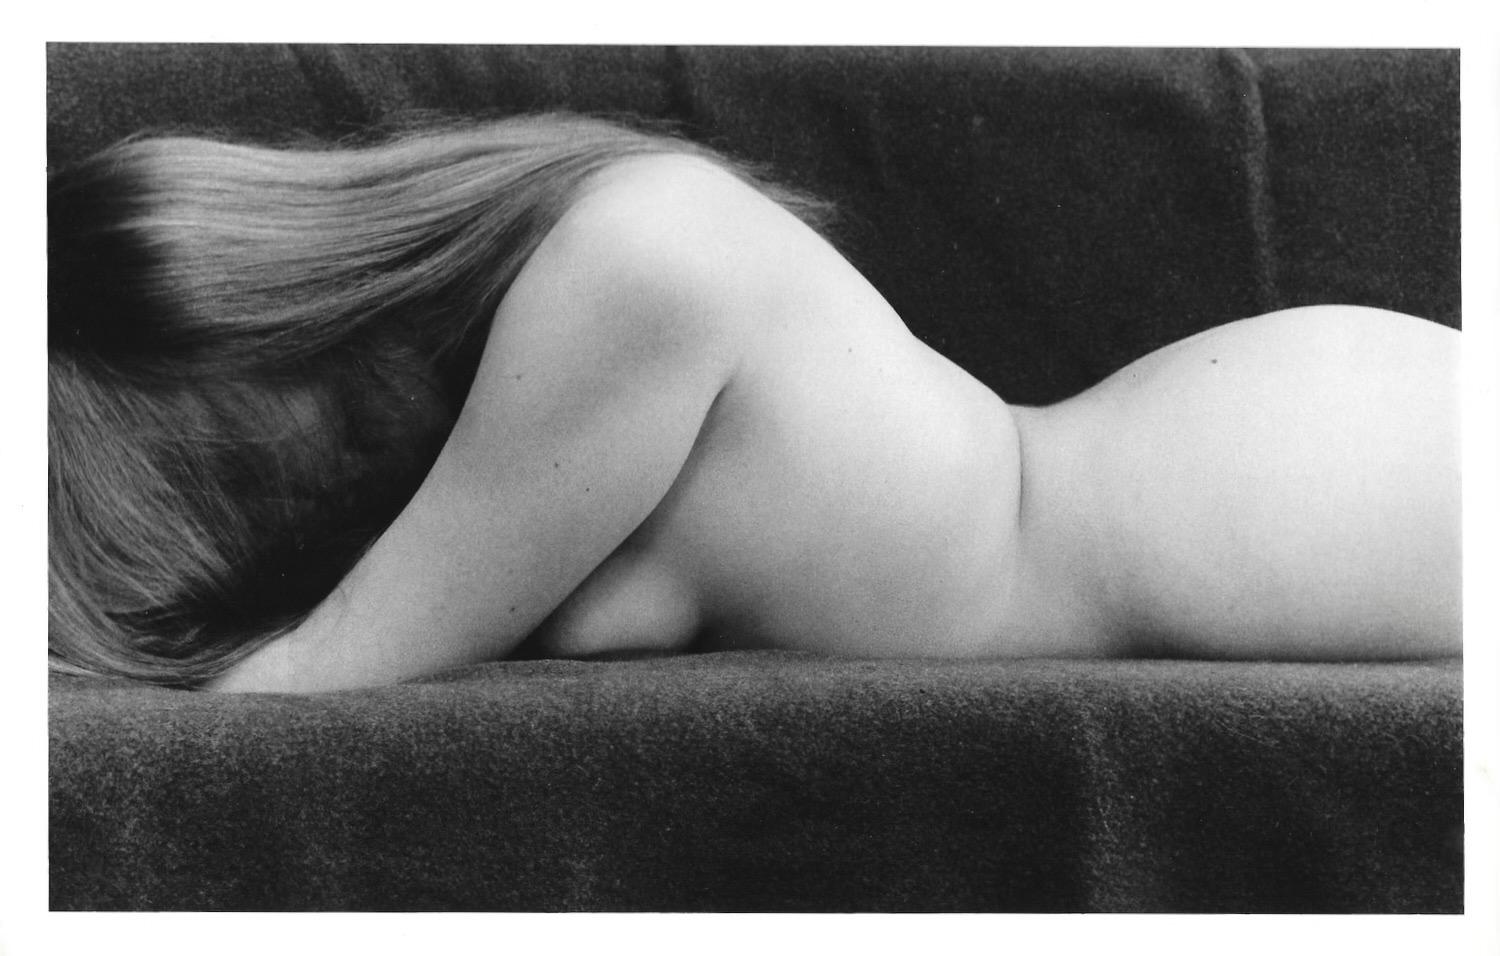 Black & White Monochrome of a Female Nude by Contemporary American Photographer